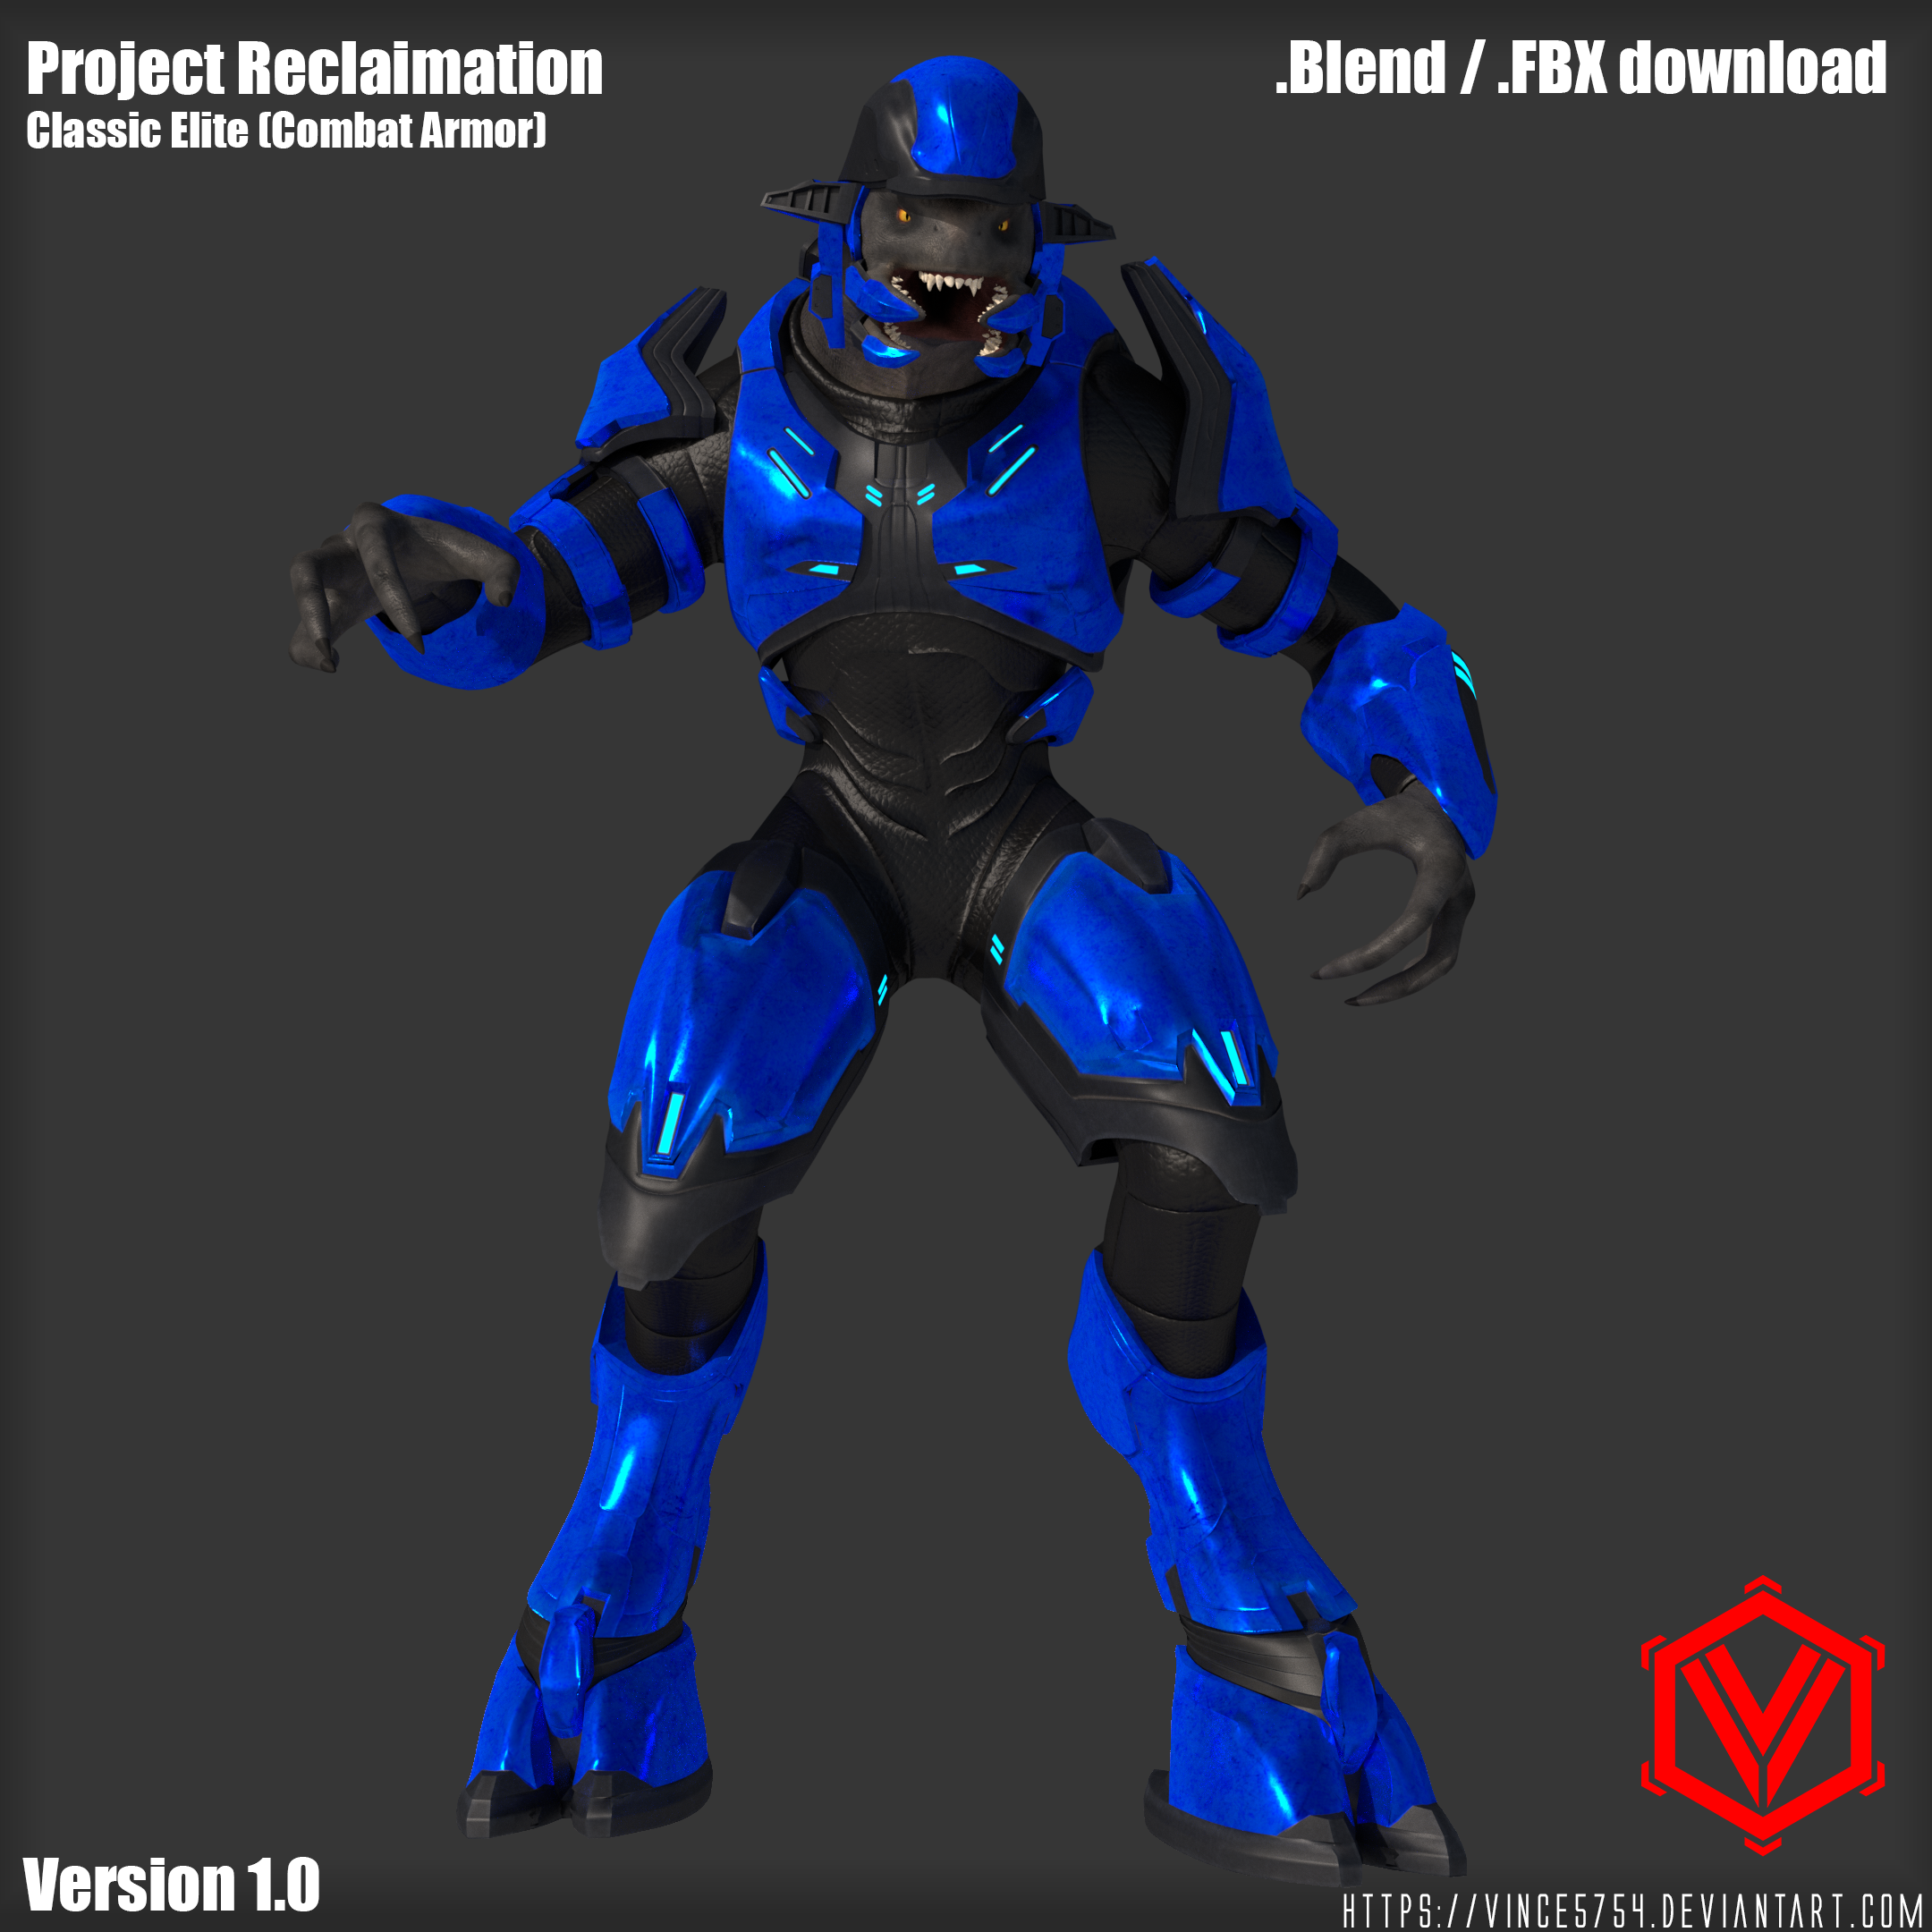 Halo 2 Anniversary Odst Build Halo Costume And Prop Maker Community 405th.